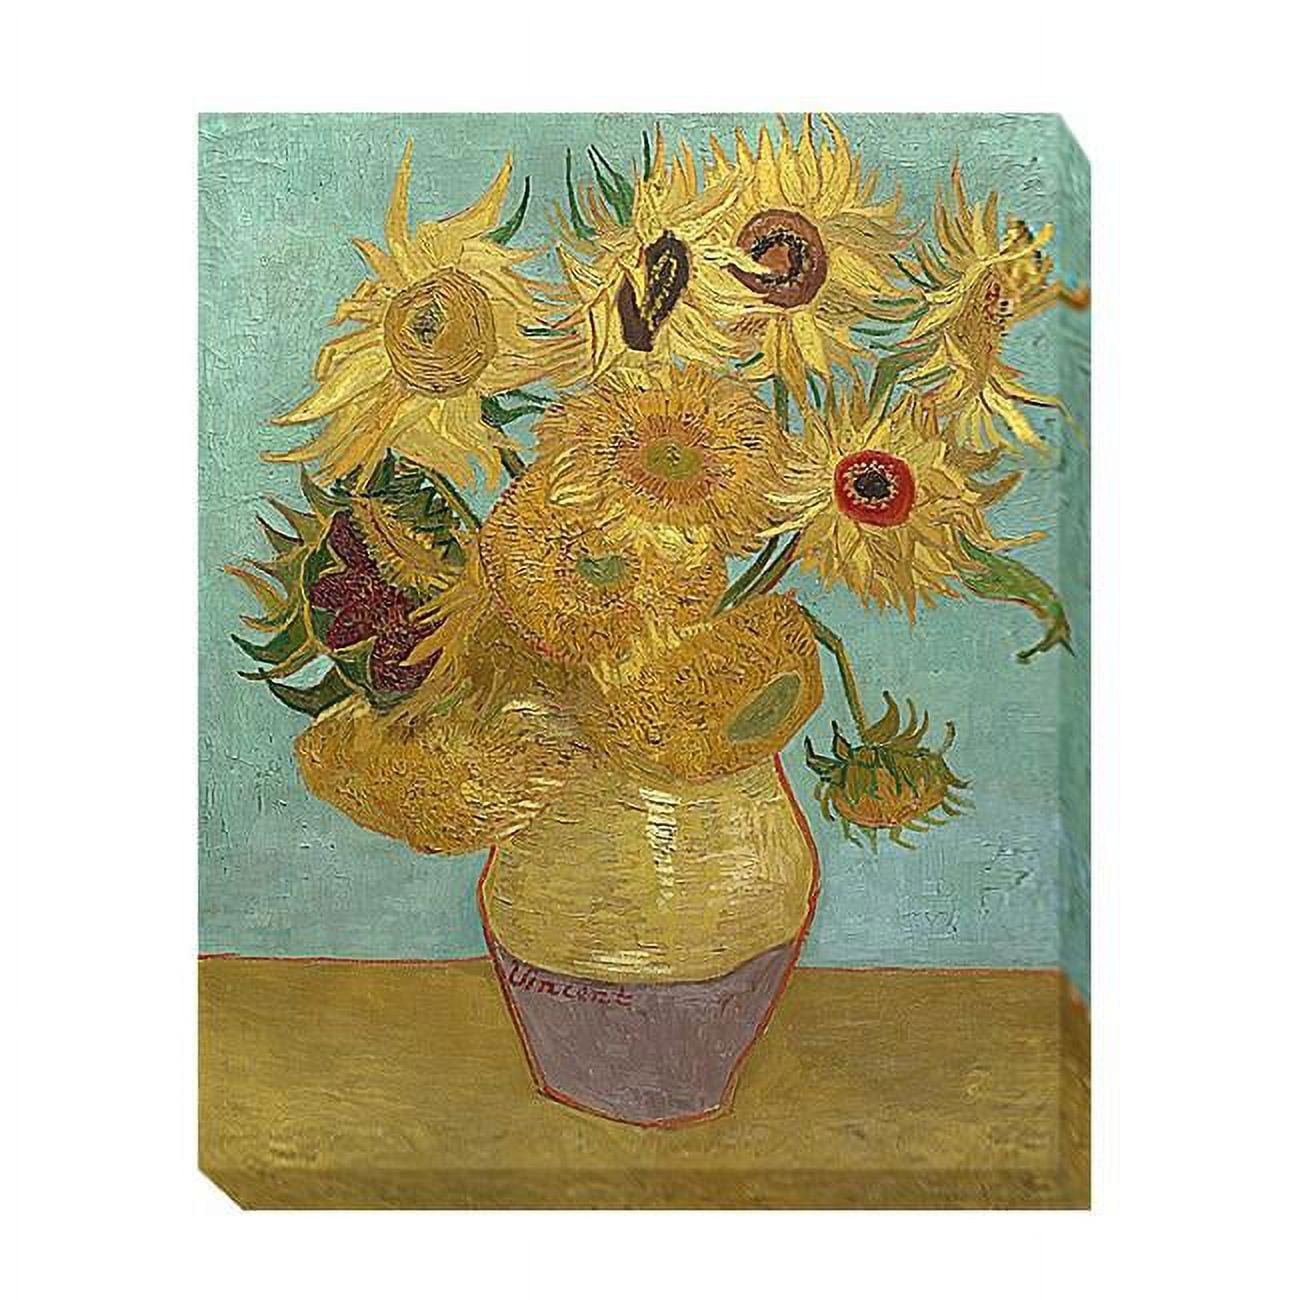 1215h964ig Sunflowers, 1889 By Vincent Van Gogh Premium Gallery-wrapped Canvas Giclee Art - 12 X 15 X 1.5 In.